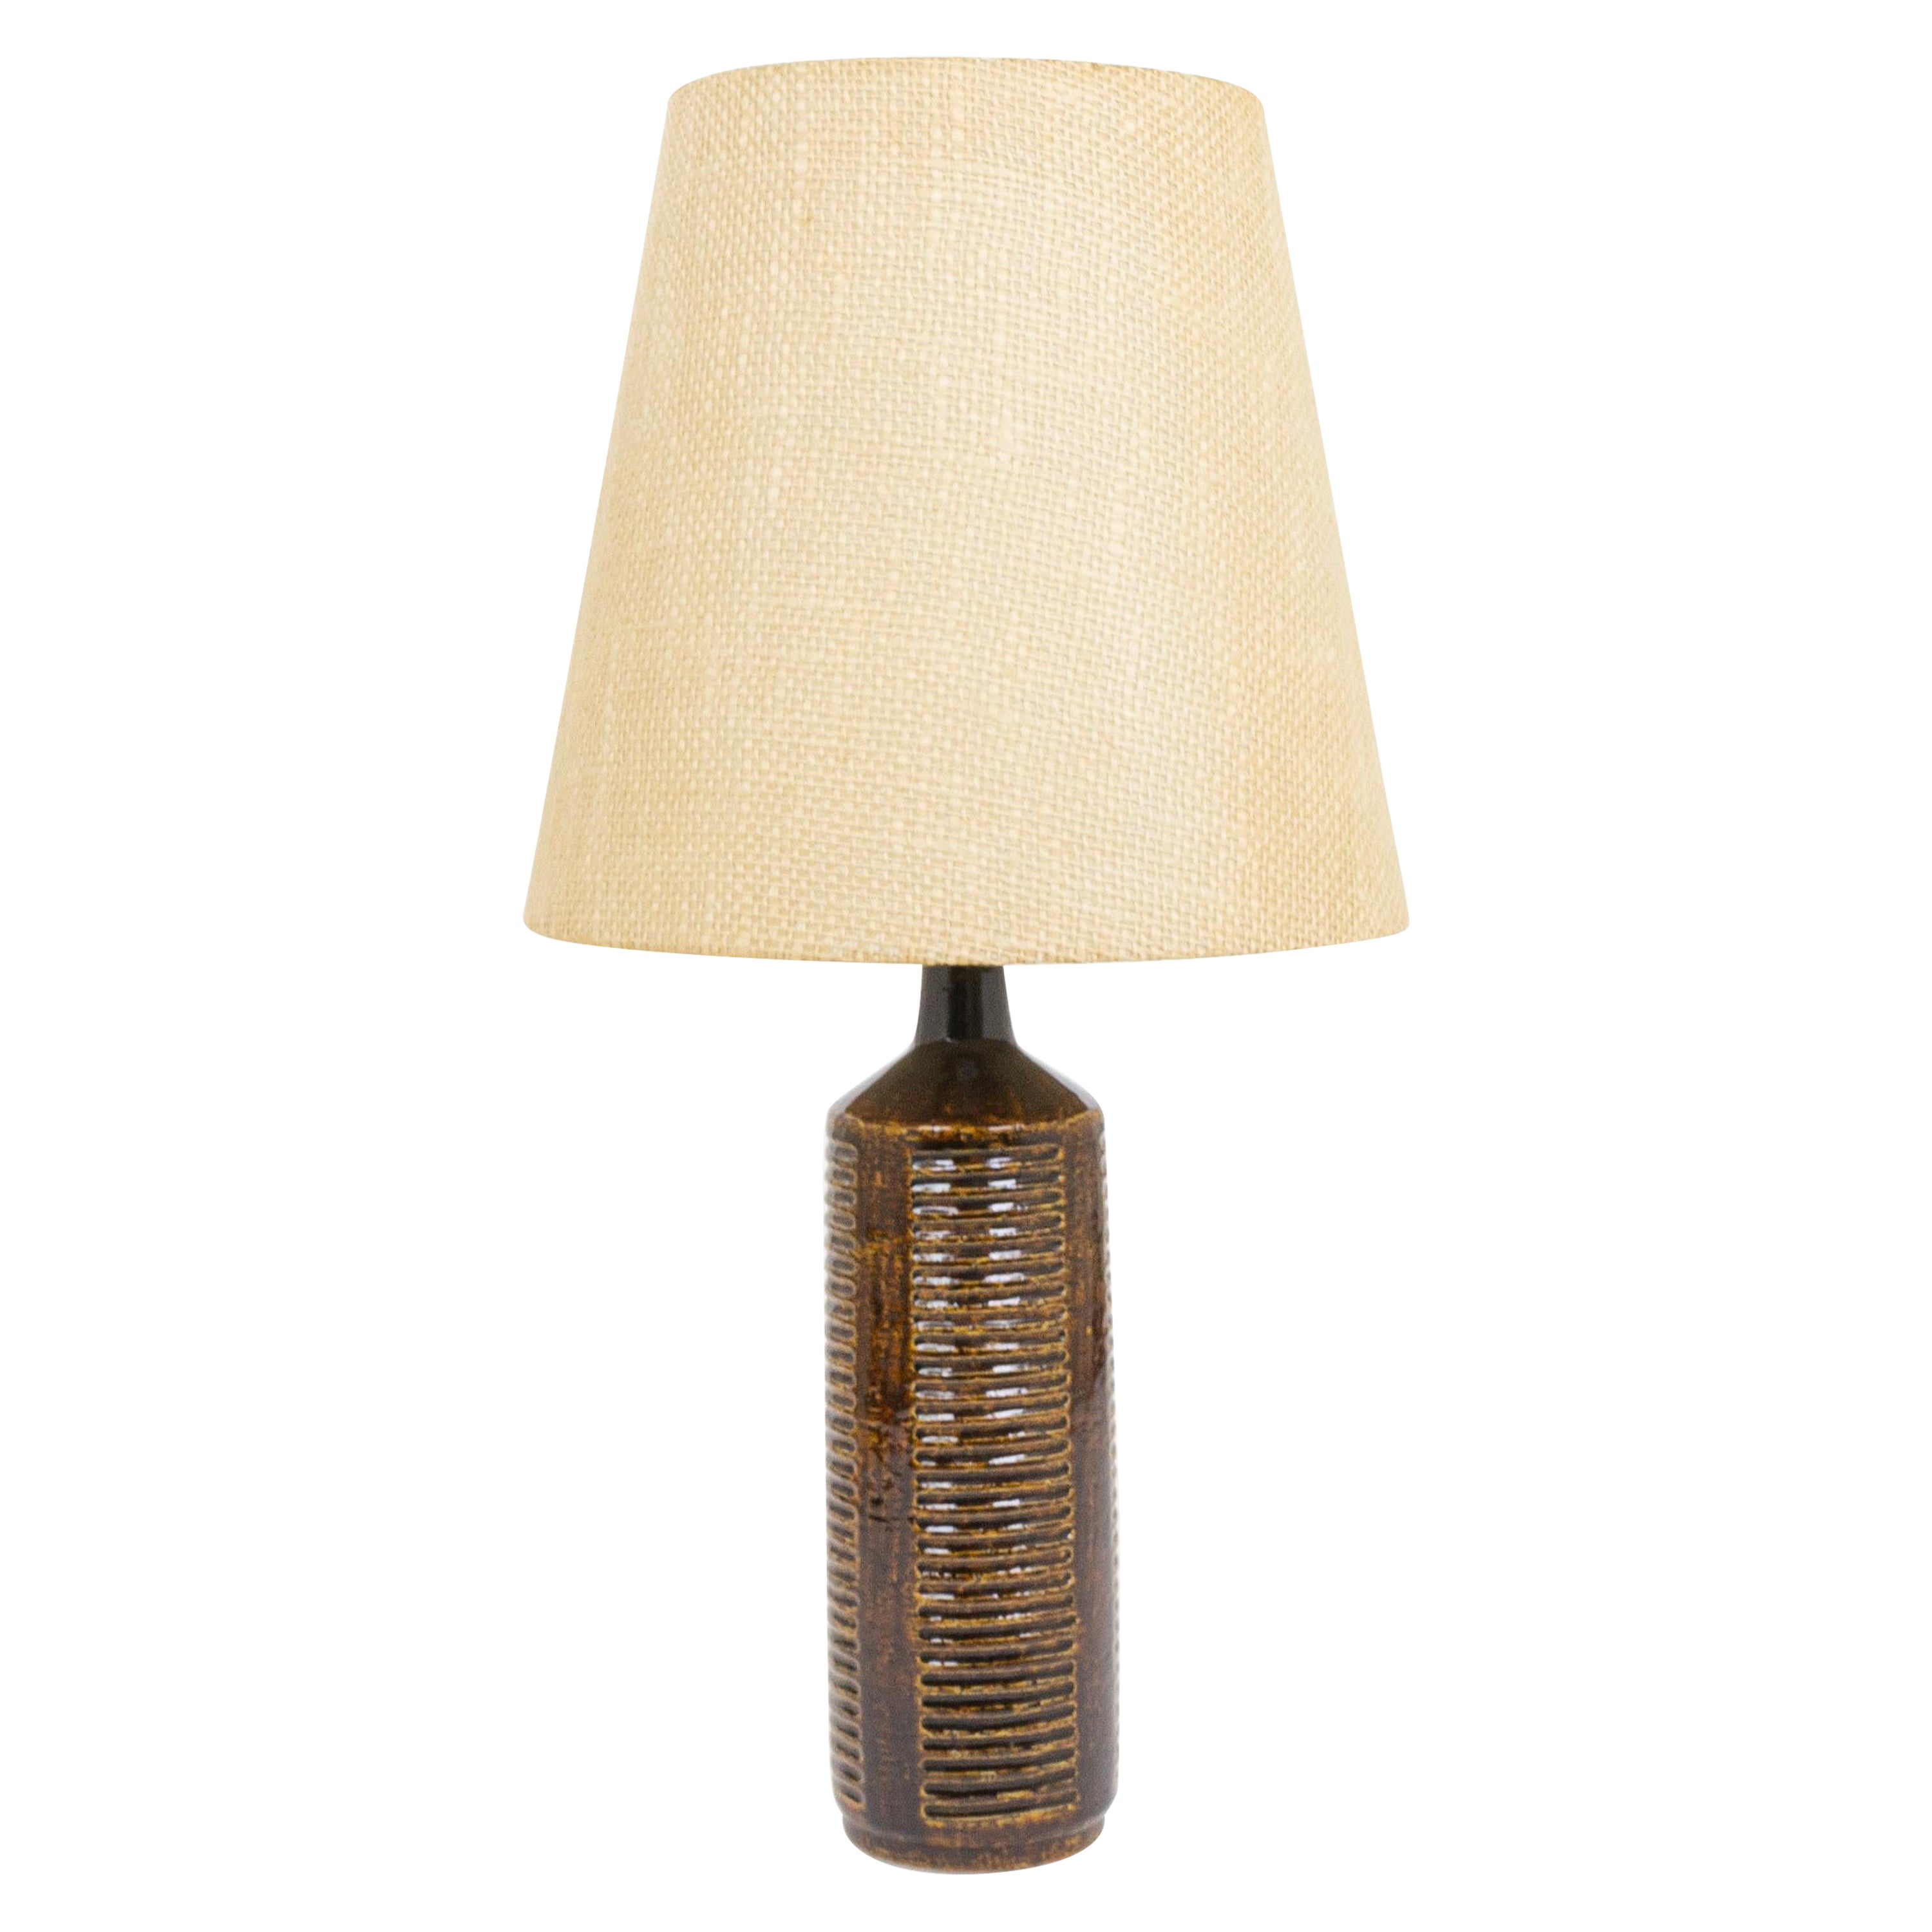 Chocolate Brown DL/27 XL table lamp by Linnemann-Schmidt for Palshus, 1960s For Sale